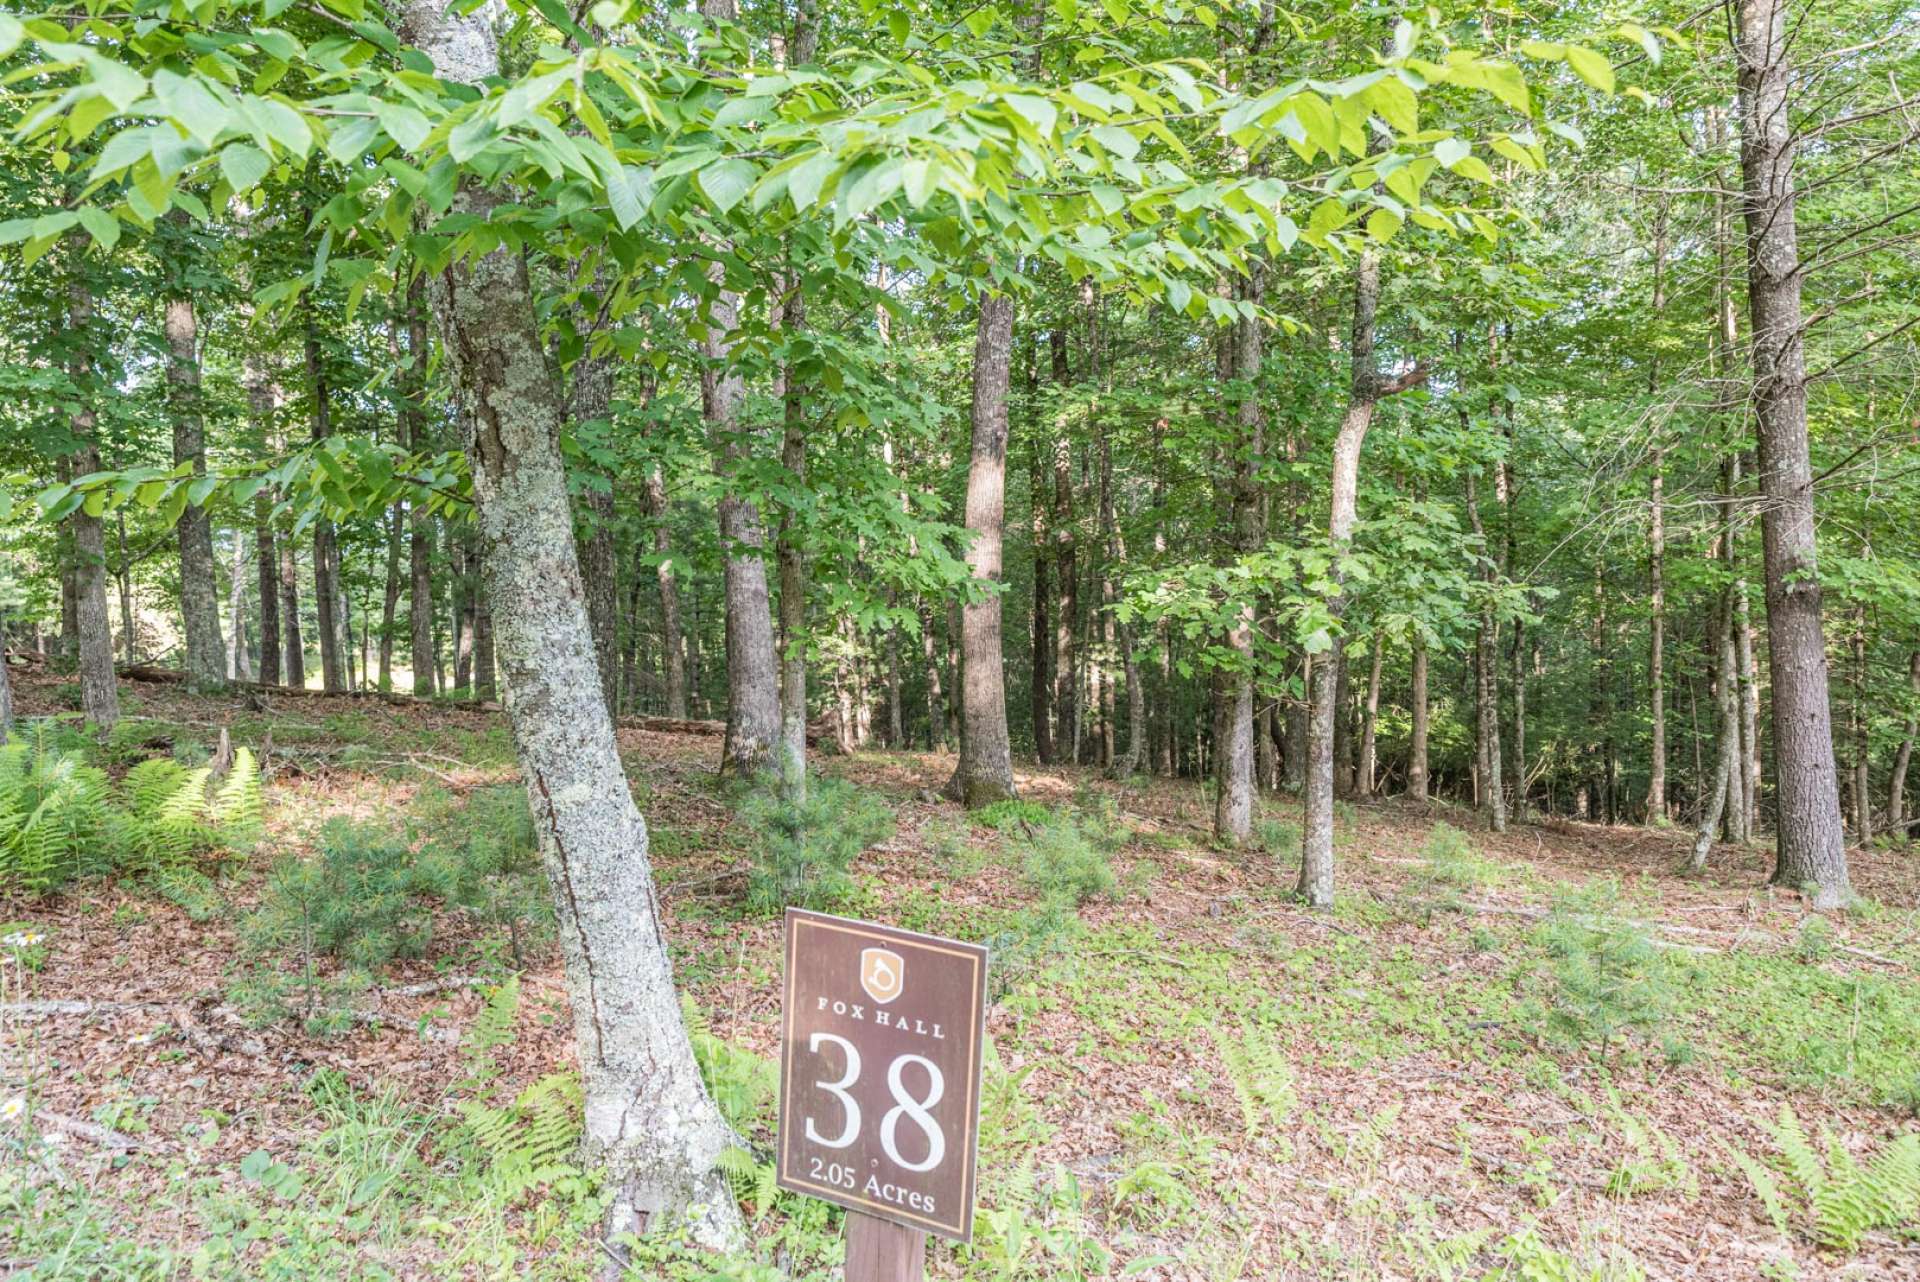 Lot 38 is a 2.05 acre beautifully wooded building site in Fox Hall.